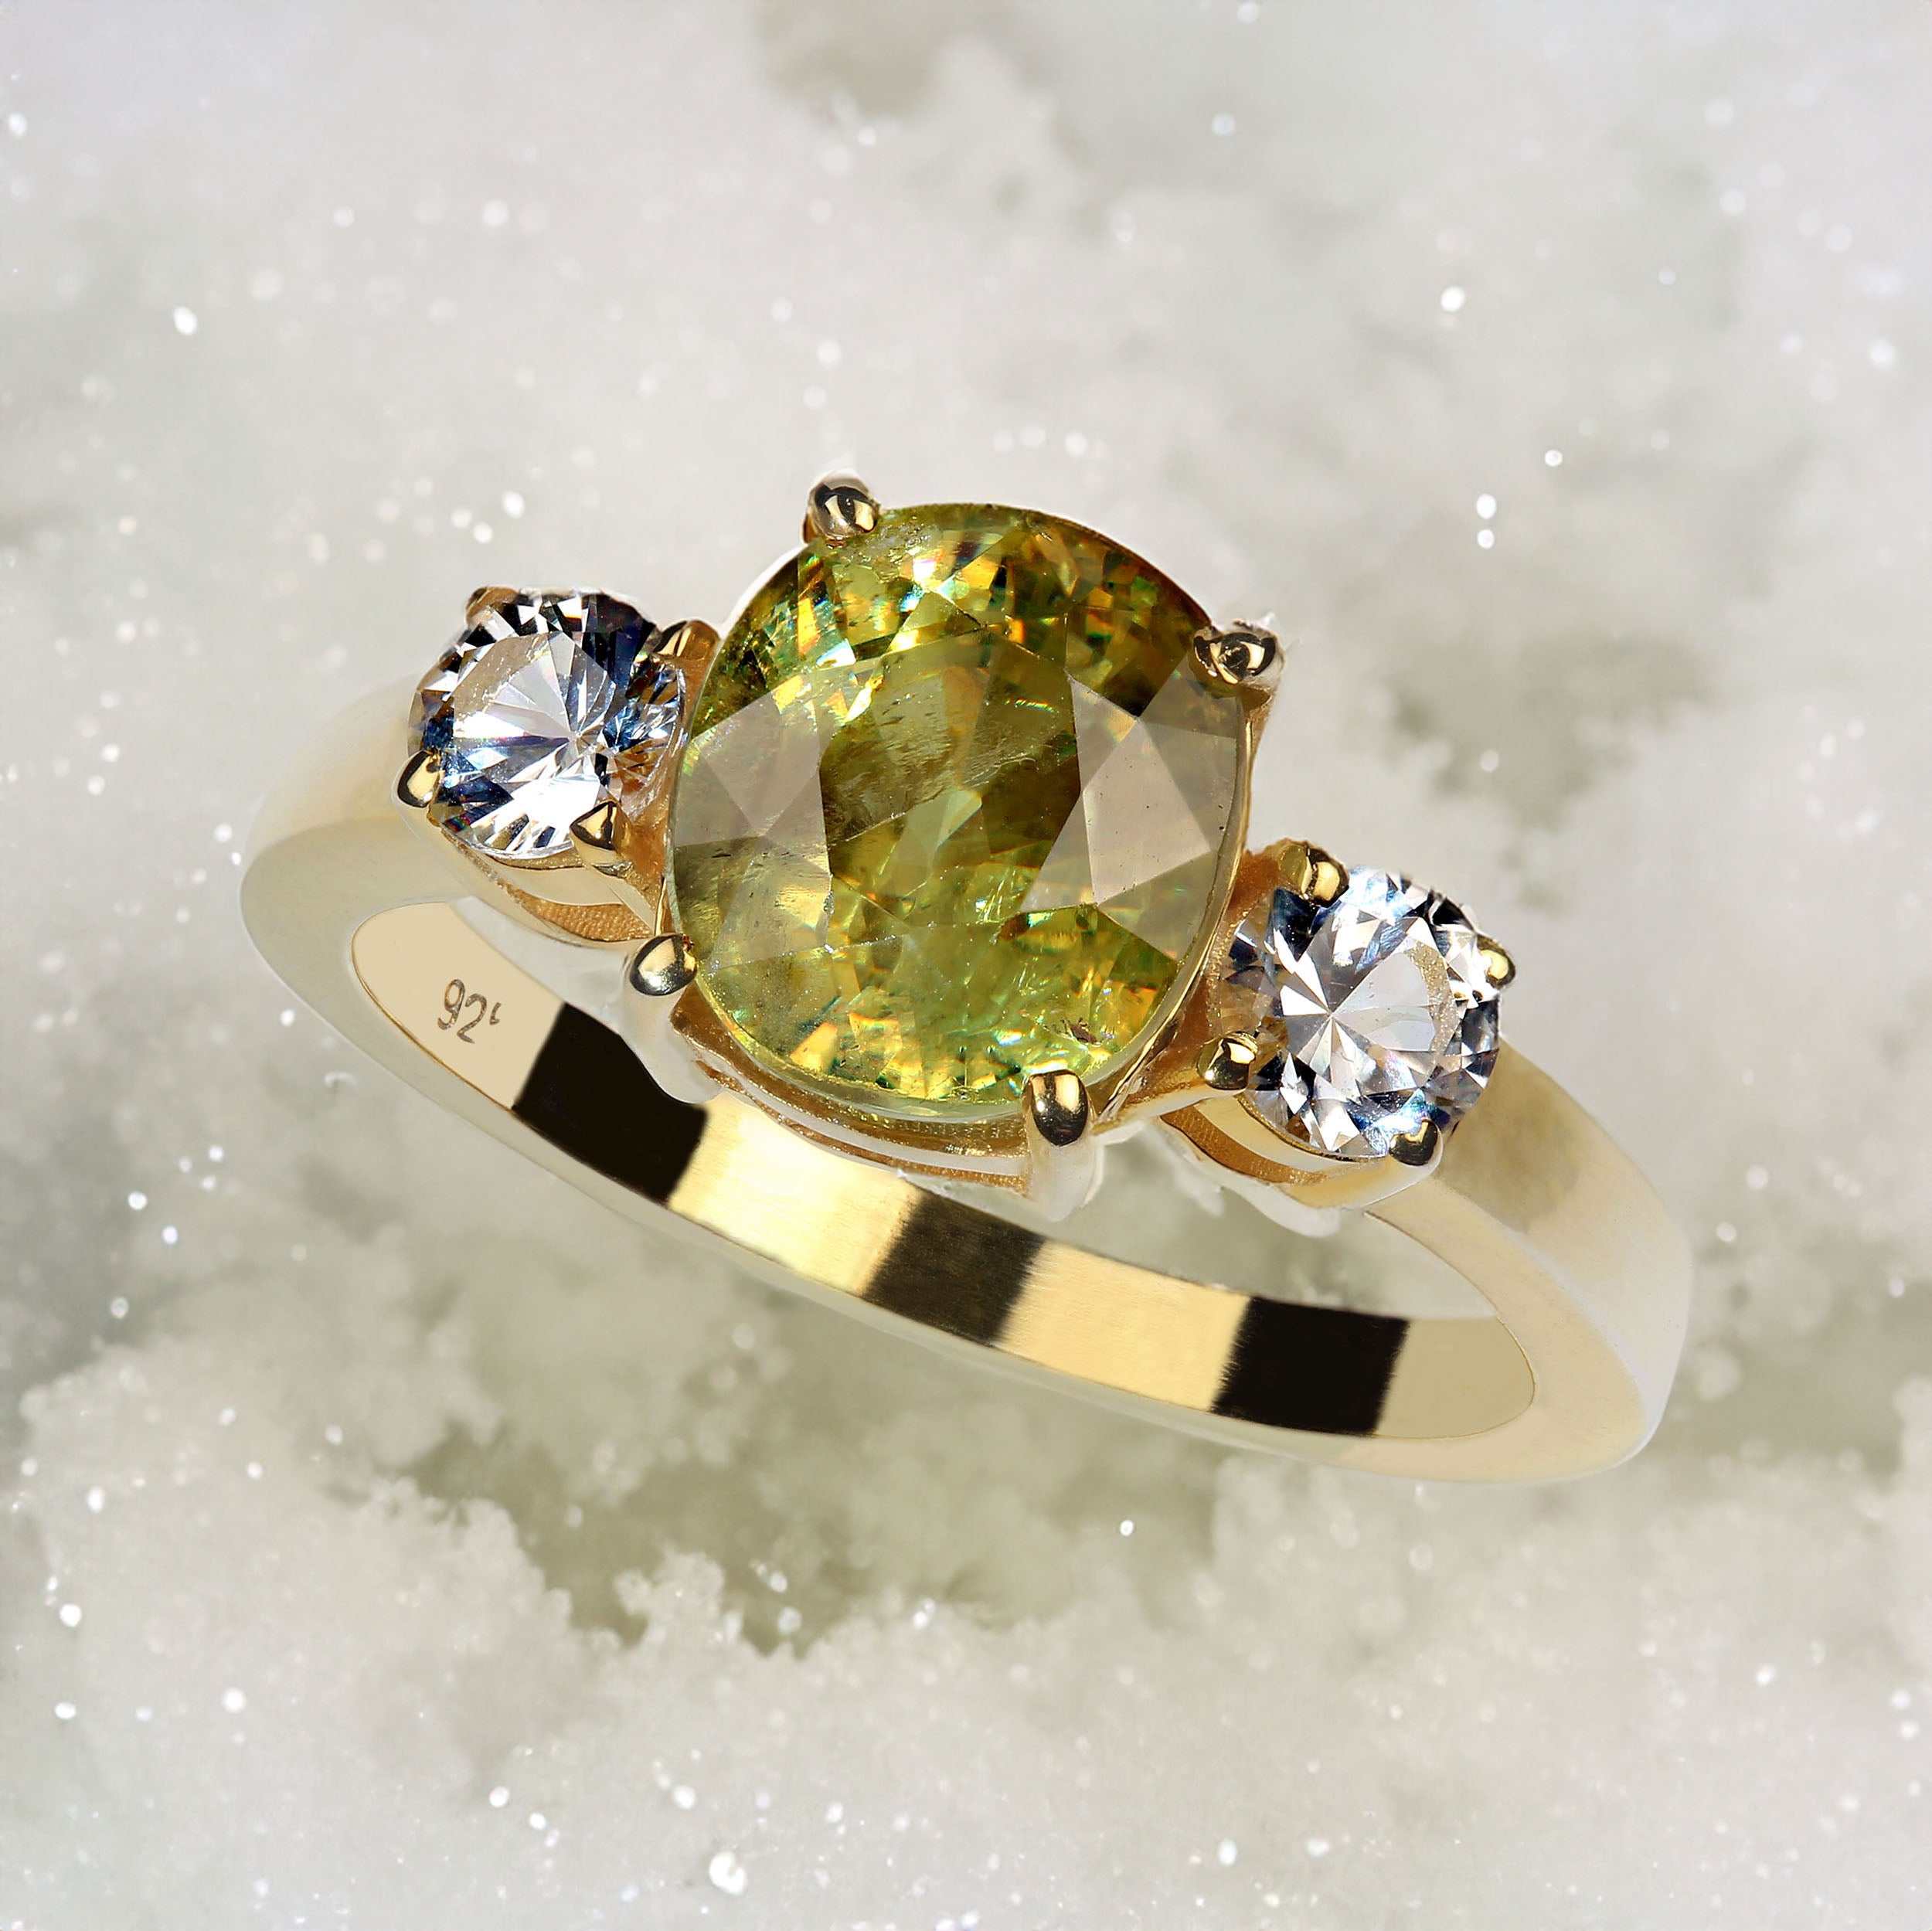 Size 8 ring of oval Sphene and white Sapphires.  This classic ring features a scintillating limey yellowy oval Sphene of 3.35ct accented with two round 4MM white Sapphires of 0.67ct. These lovely gemstones are custom set in gold rhodium over